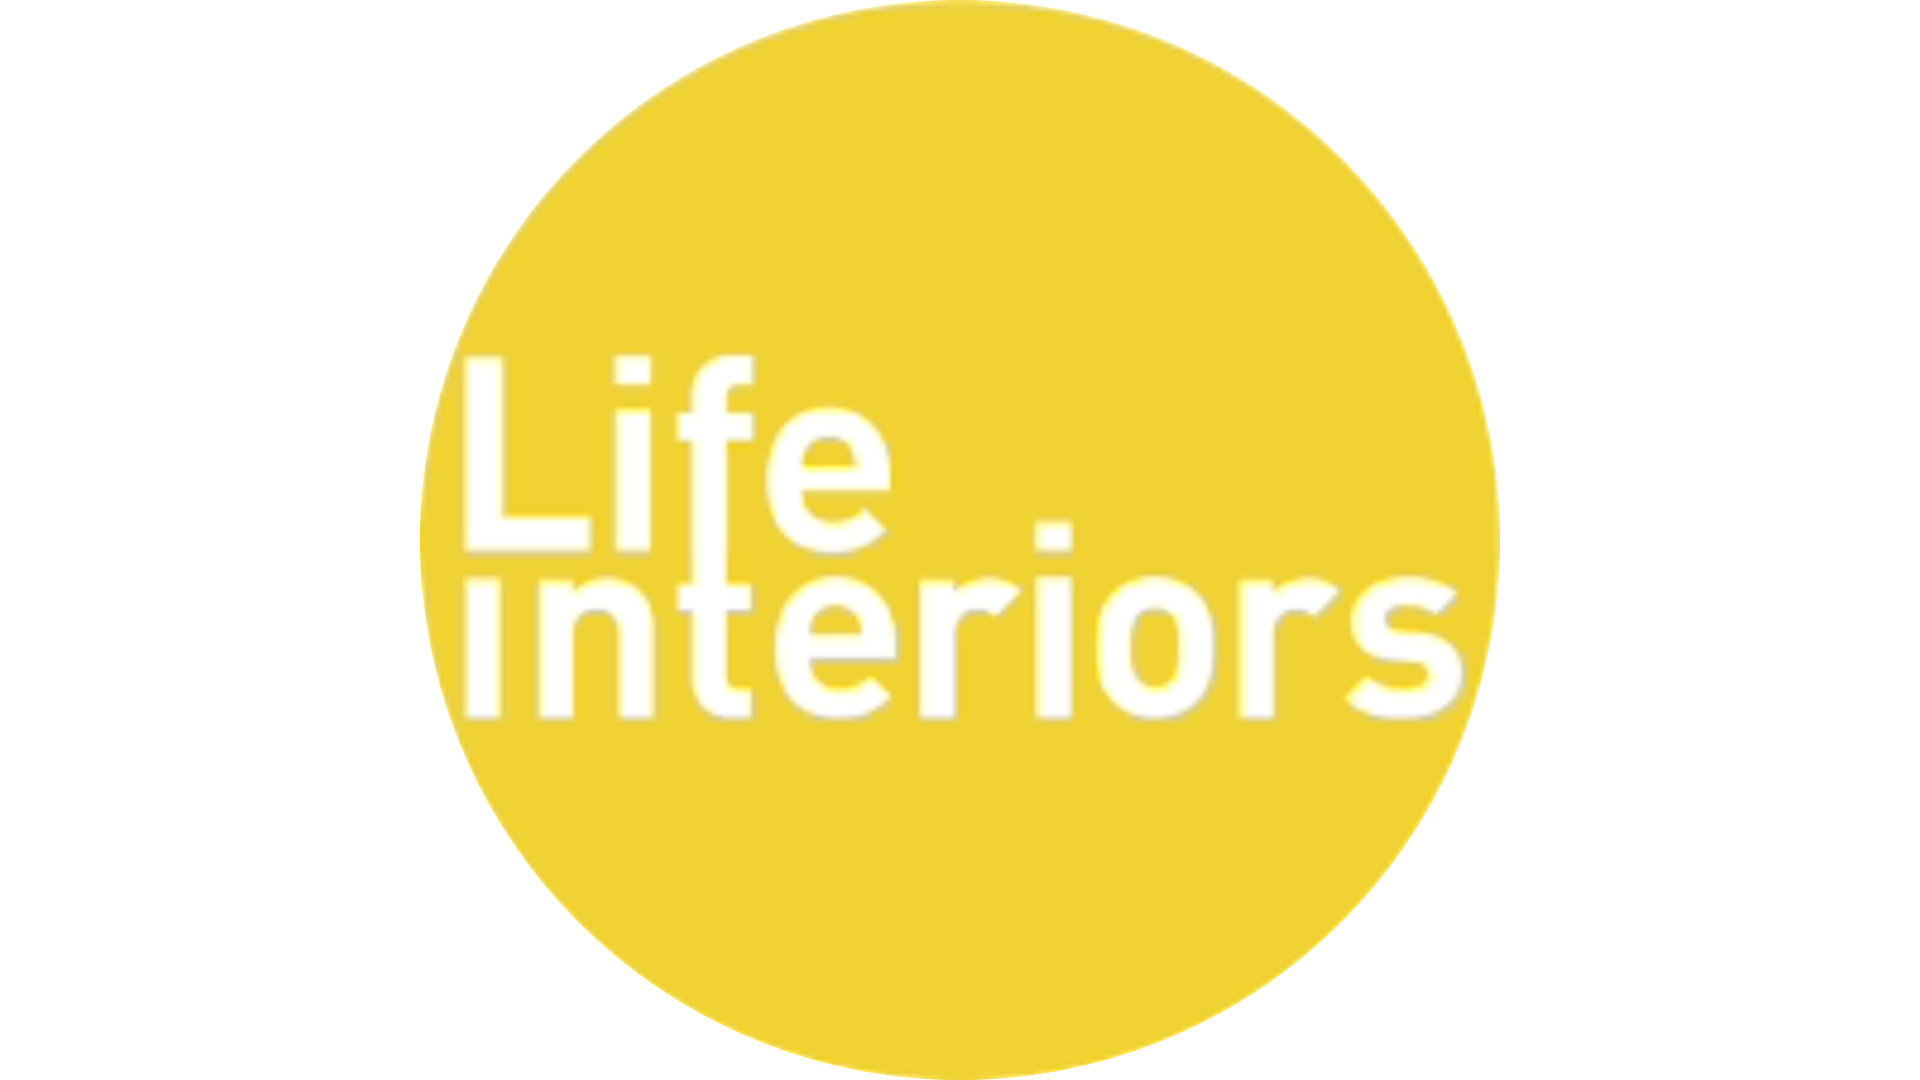 Get the White on White style by shopping with Life Interiors 